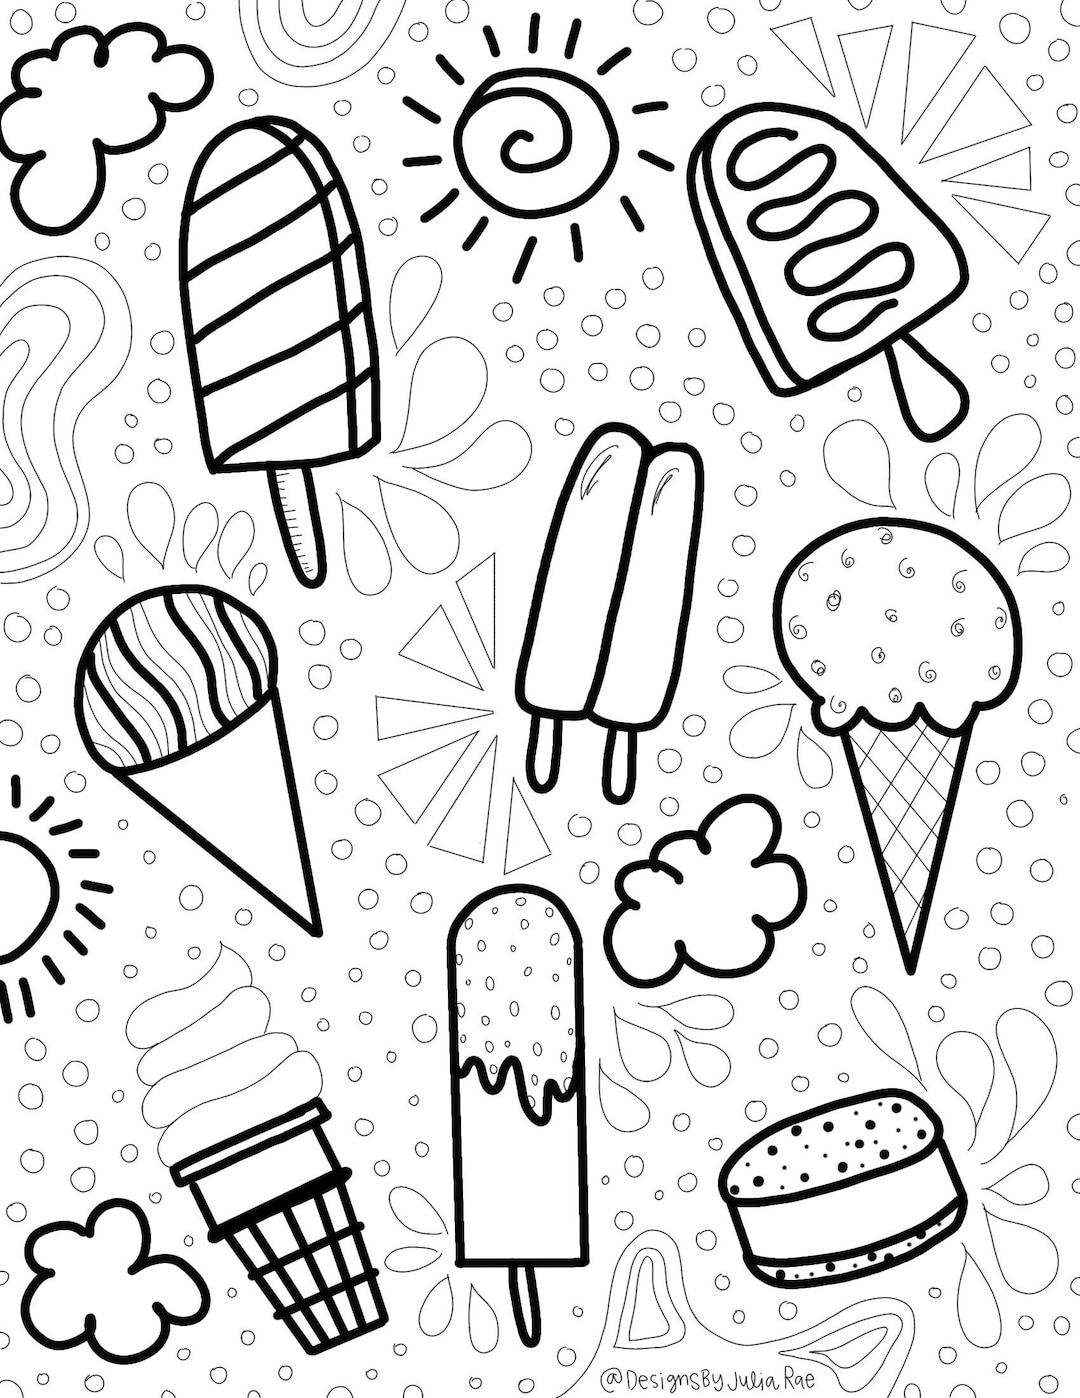 Popsicle & Ice Cream Coloring Page - Etsy